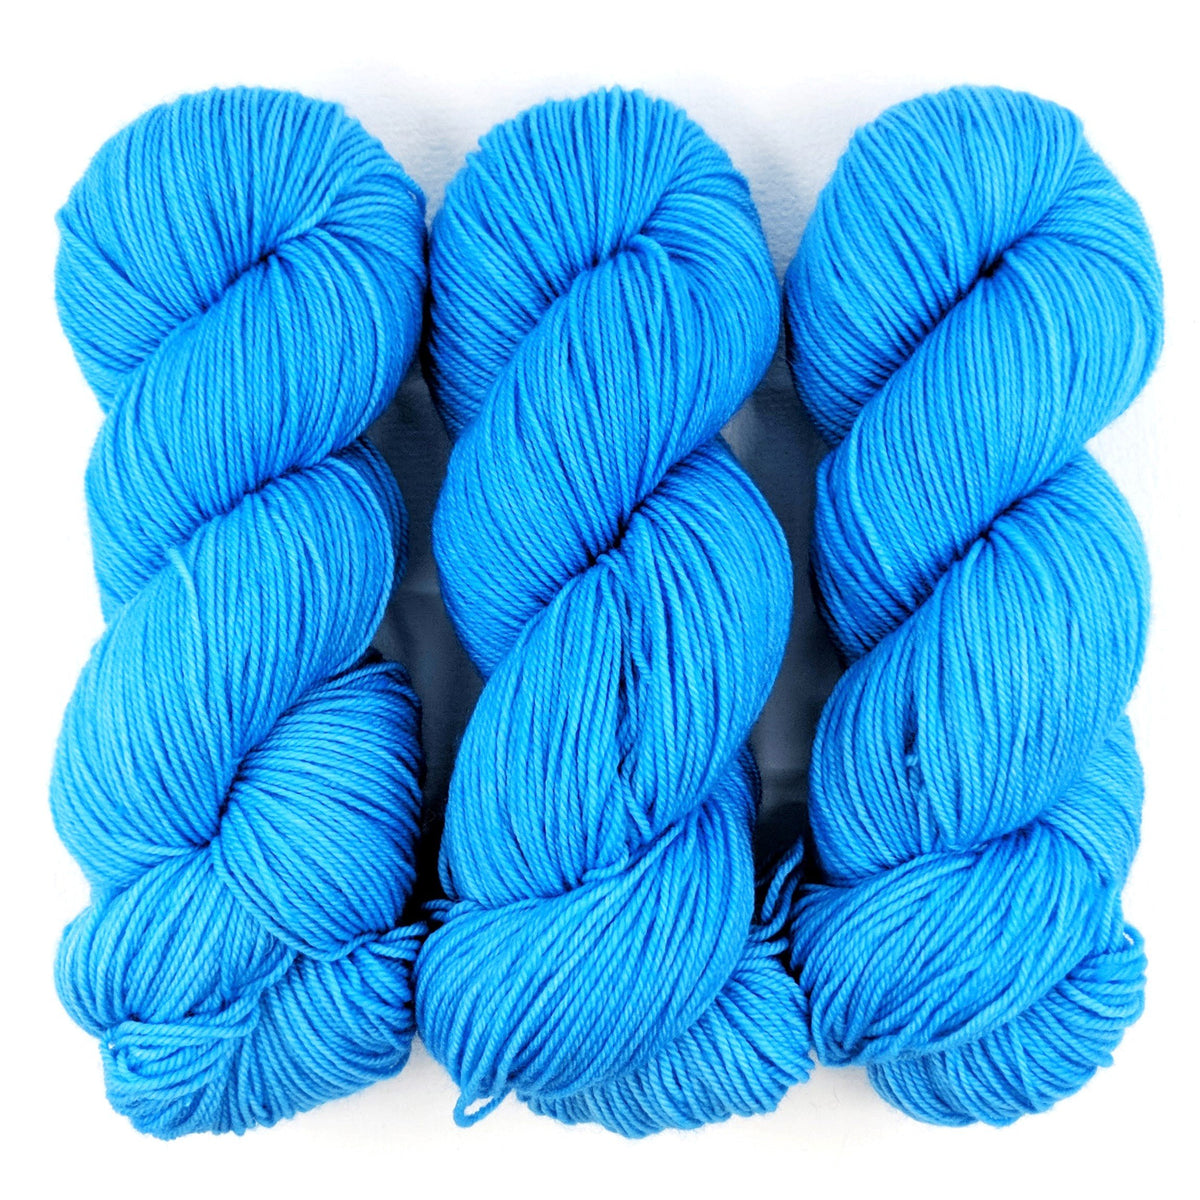 Nothing But Blue Skies in Fingering / Sock Weight